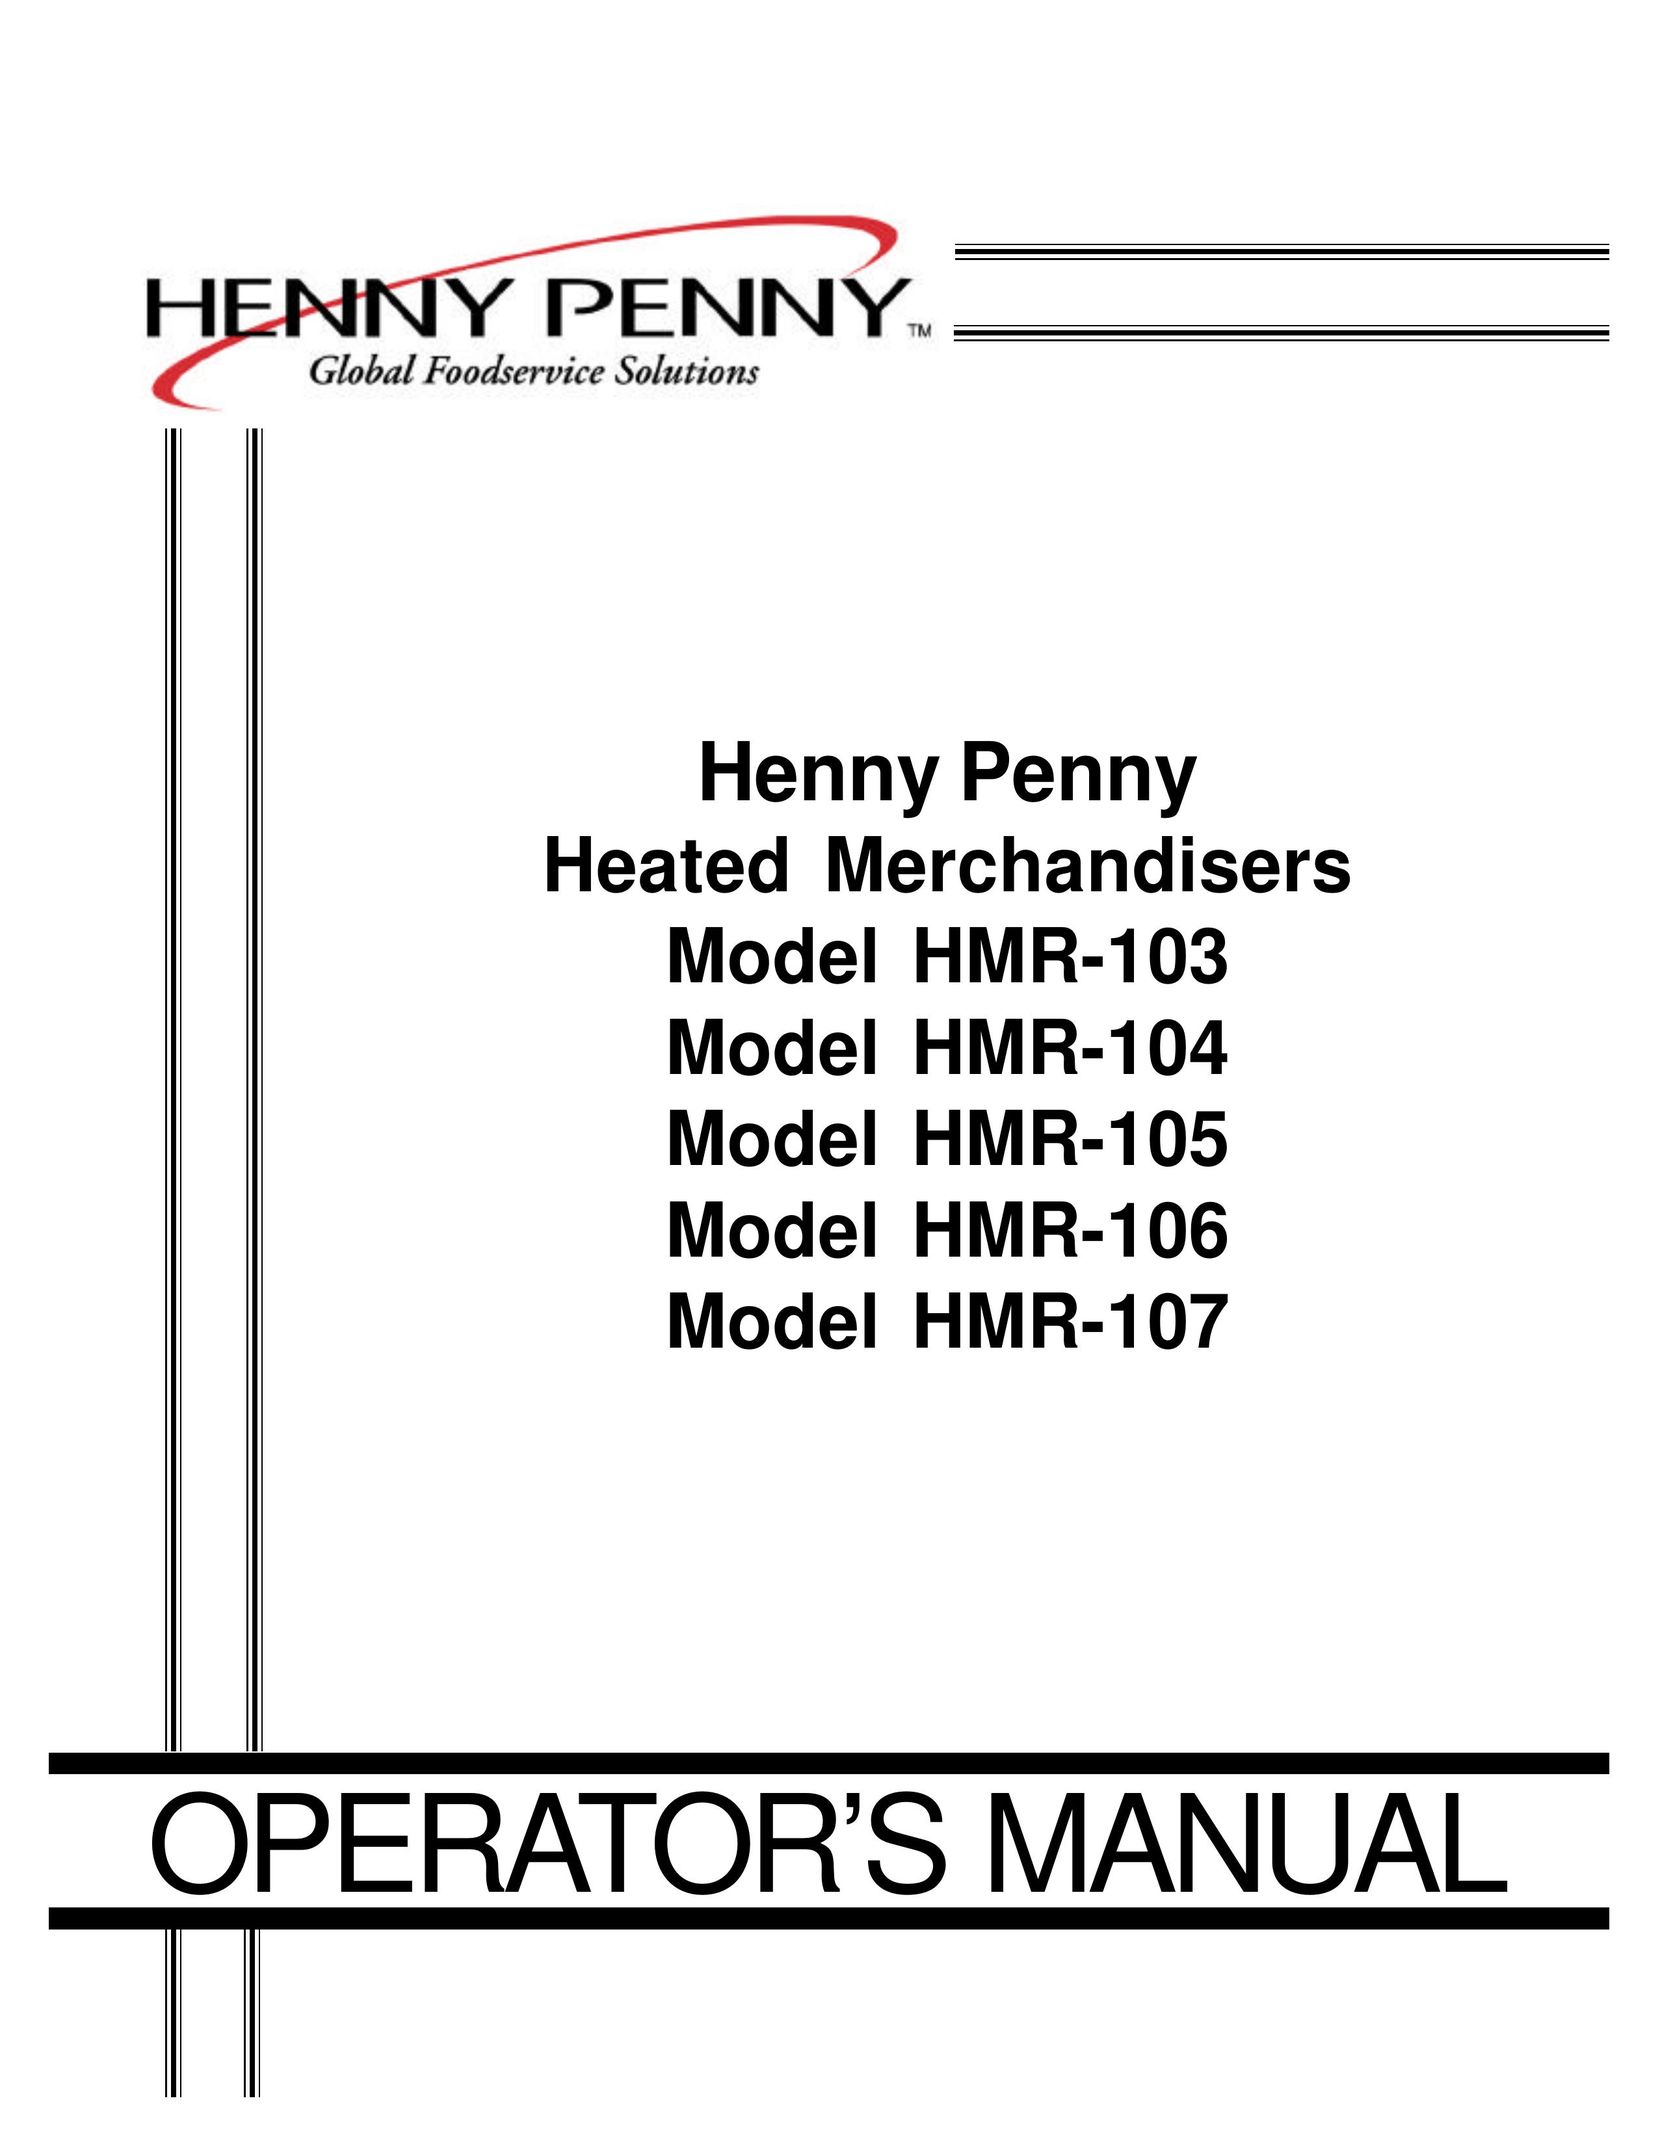 Henny Penny HMR-103 Electric Heater User Manual